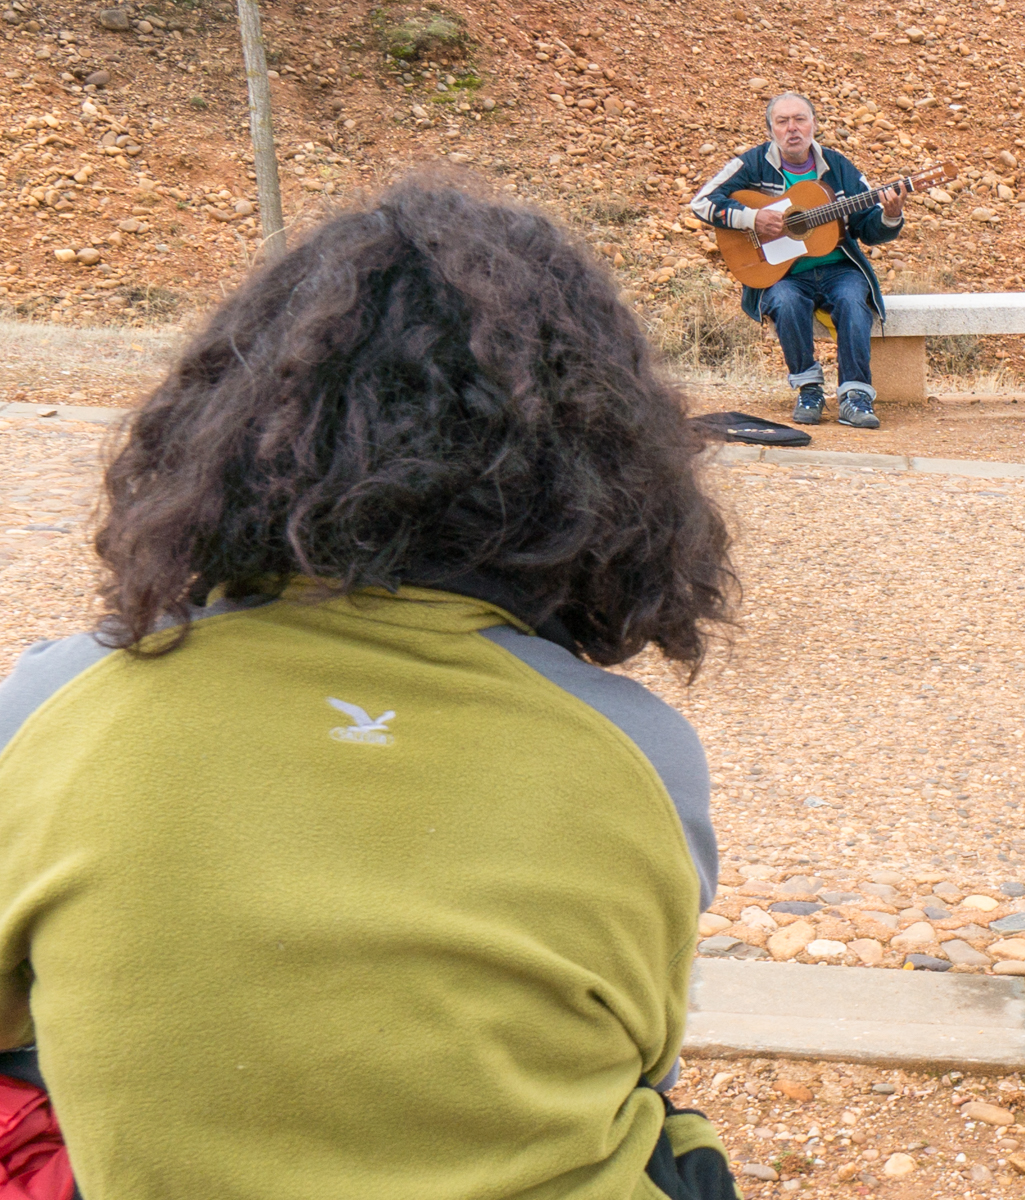 A Camino pilgrim listens to a local guitarist before continuing on to San Justo de la Vega, Spain | Photo by Mike Hudak